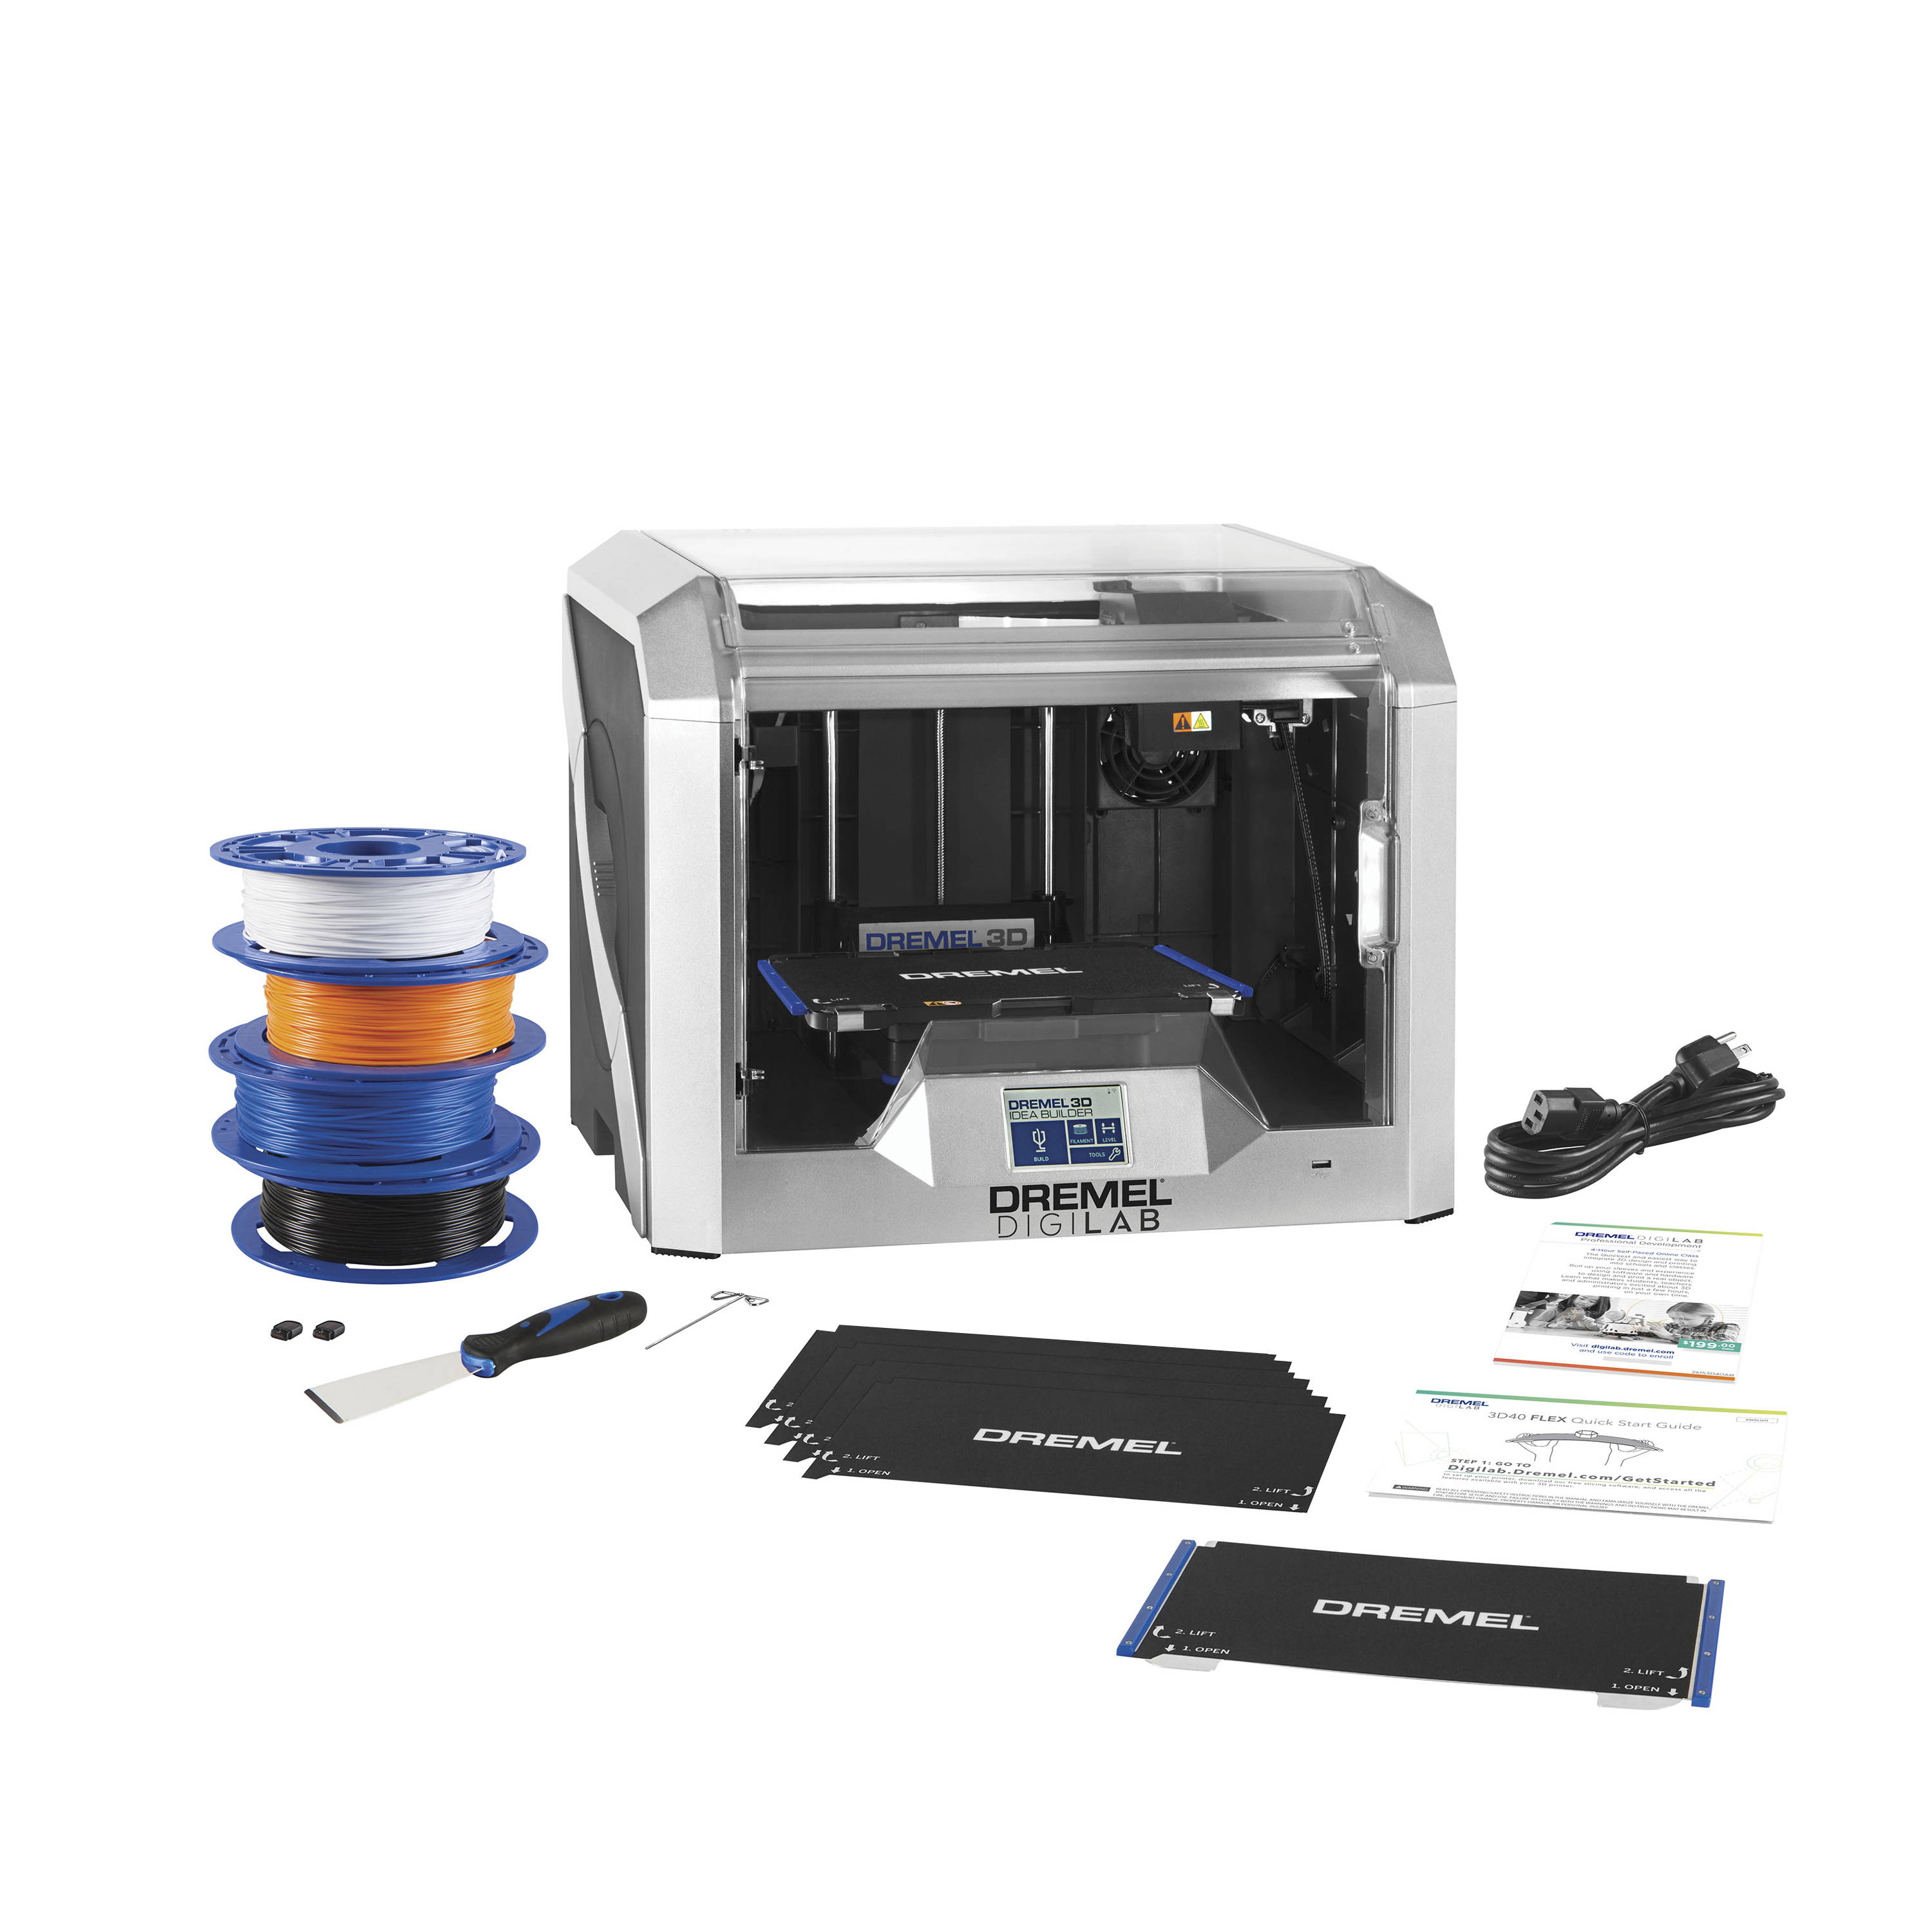 Image of 3D40-FLX-EDU 3D printer bundle with all included contents